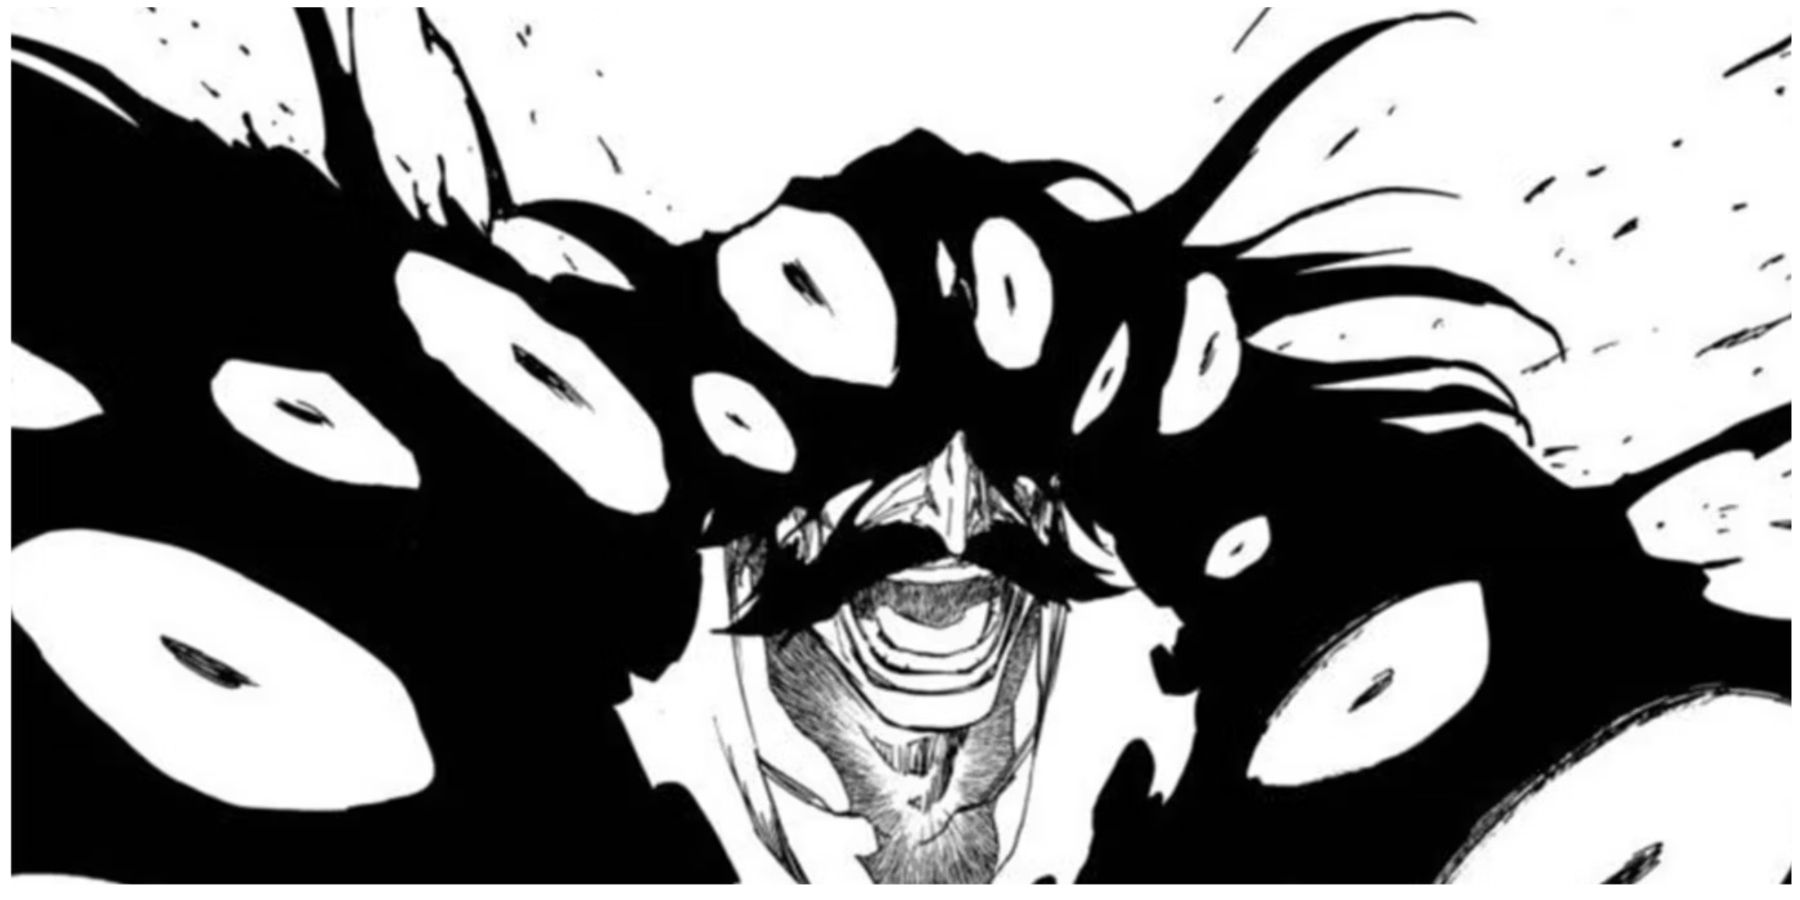 Yhwach Laughing While Using The Almighty In The Bleach Manga